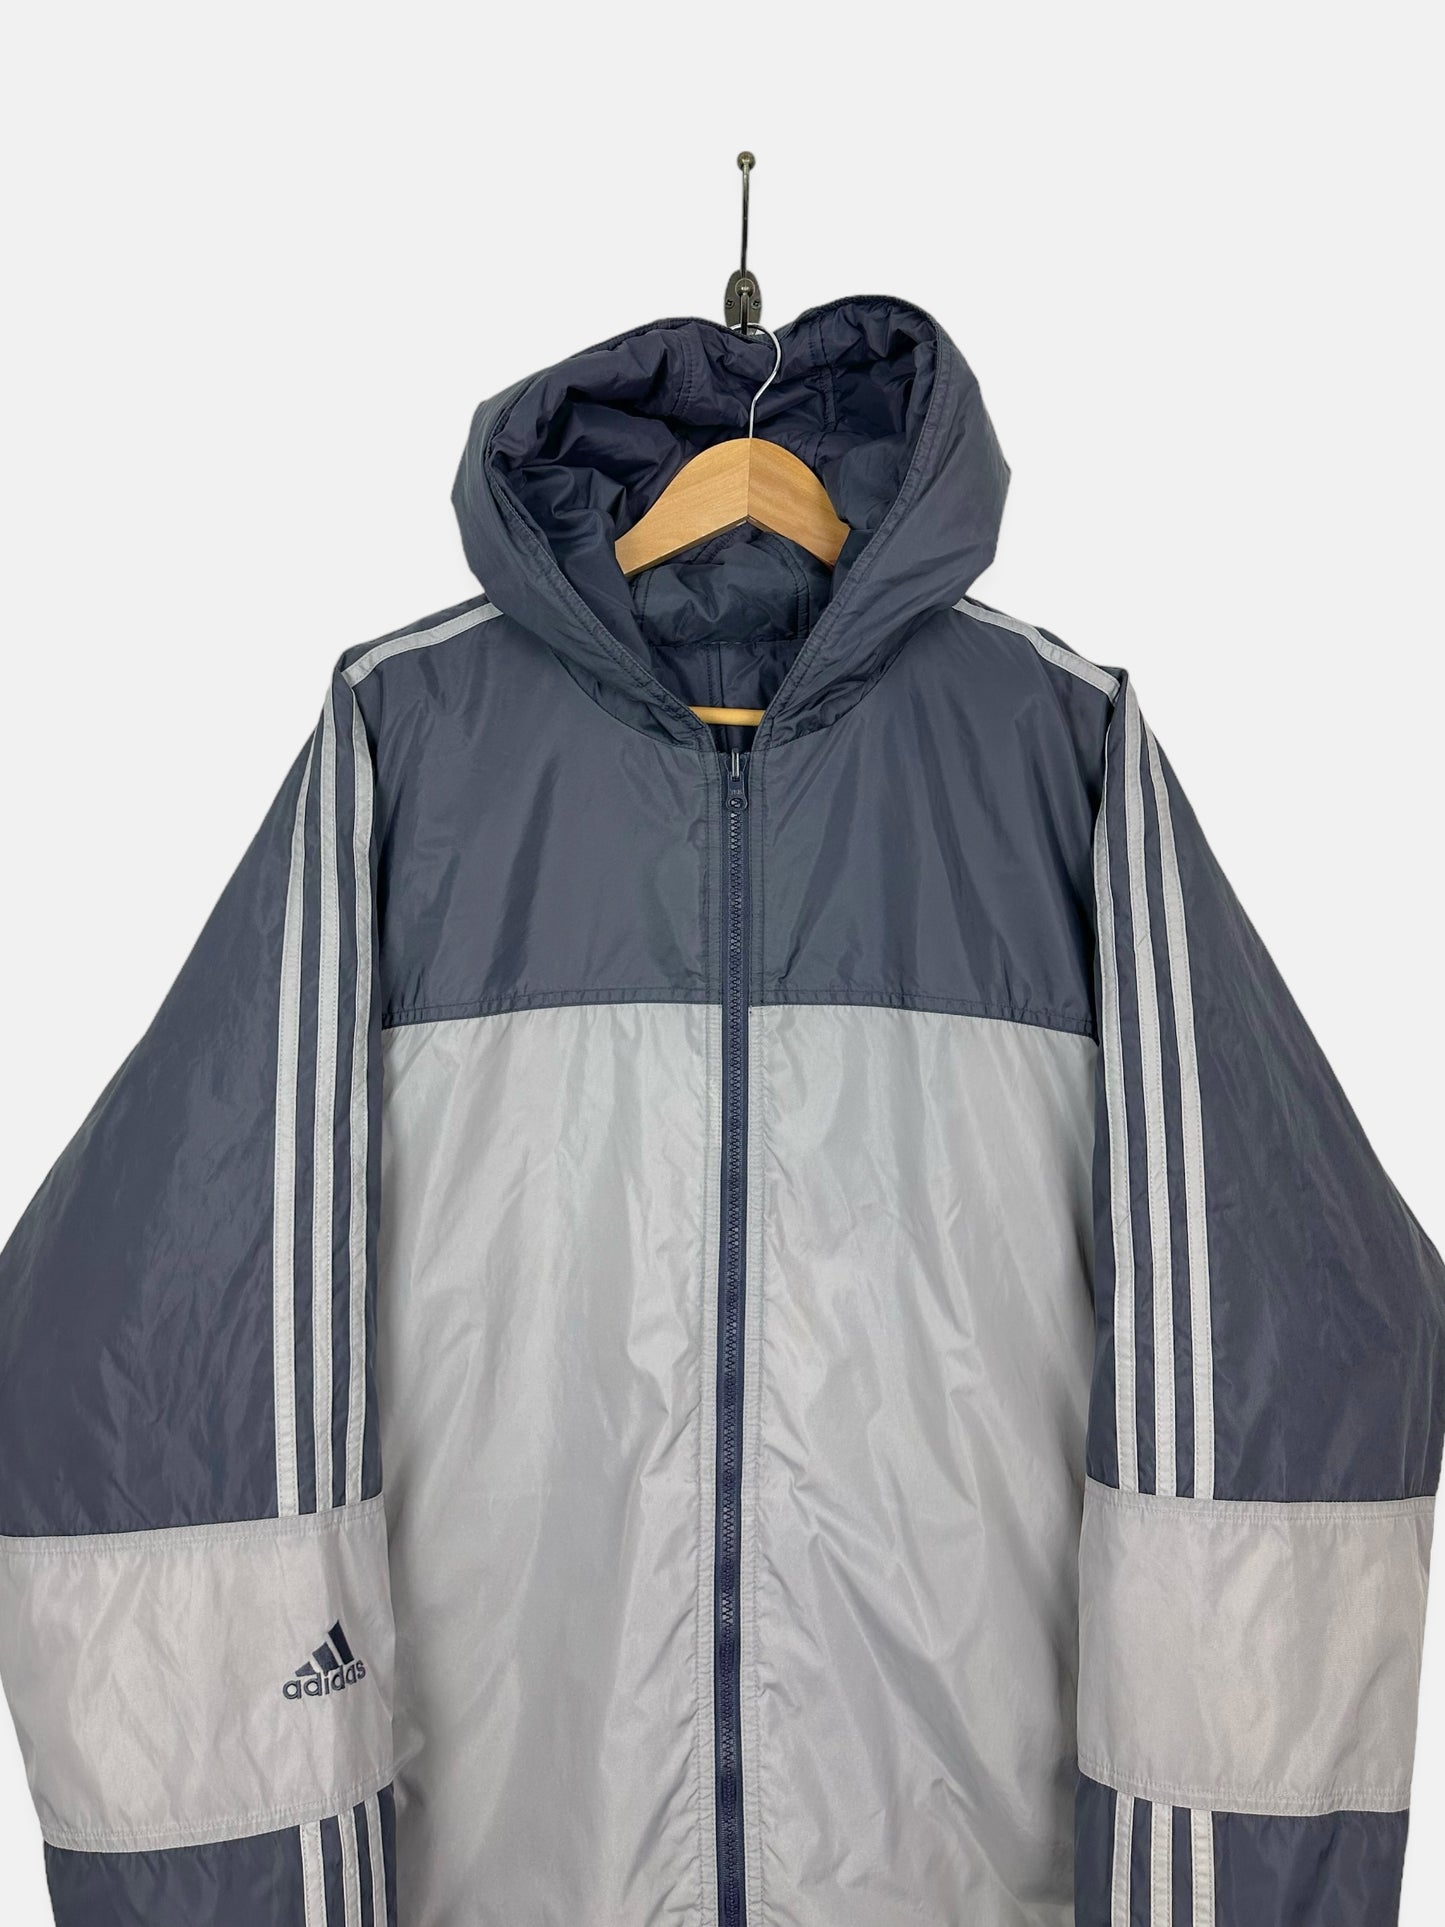 90's Reversible Adidas Embroidered Vintage Jacket with Hood Size XL